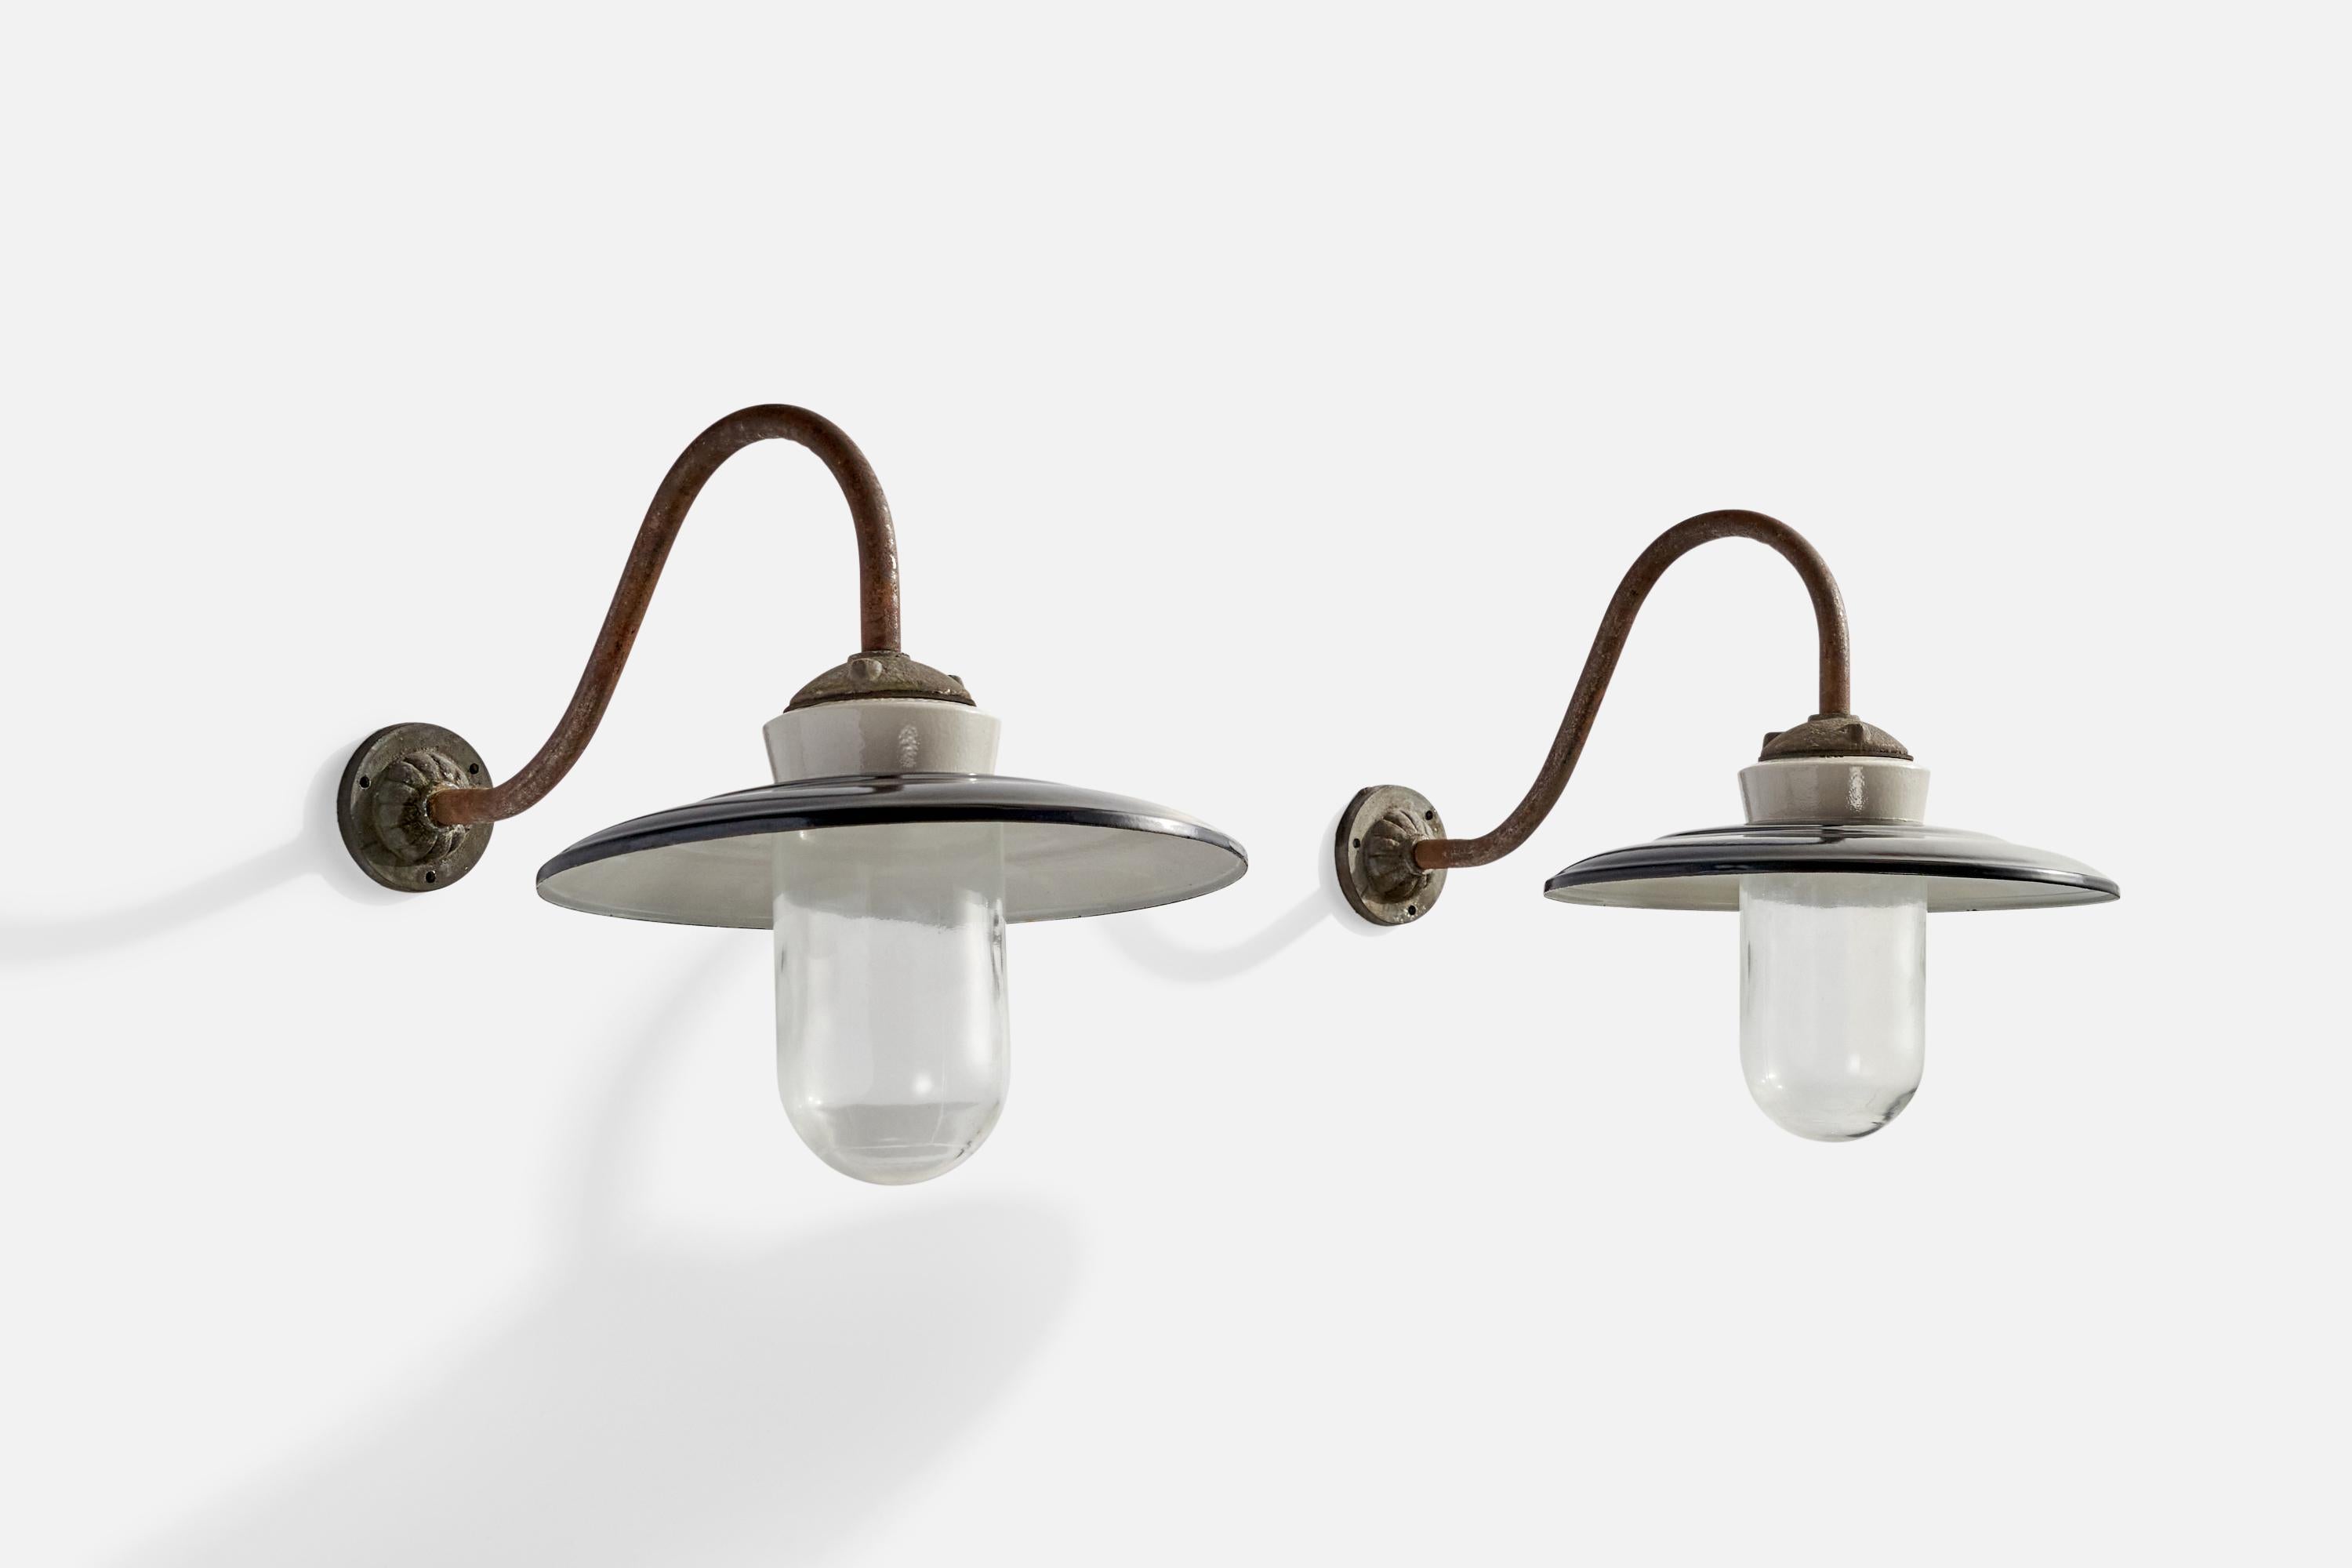 A pair of copper, glass, porcelain and white and black-lacquered metal wall lights designed and produced in Denmark, c. 1940s.

Overall Dimensions (inches): 13.77” H x 11.87” W x 21”  D
Back Plate Dimensions (inches): 3.33” H x 3.33” W x 1.34”